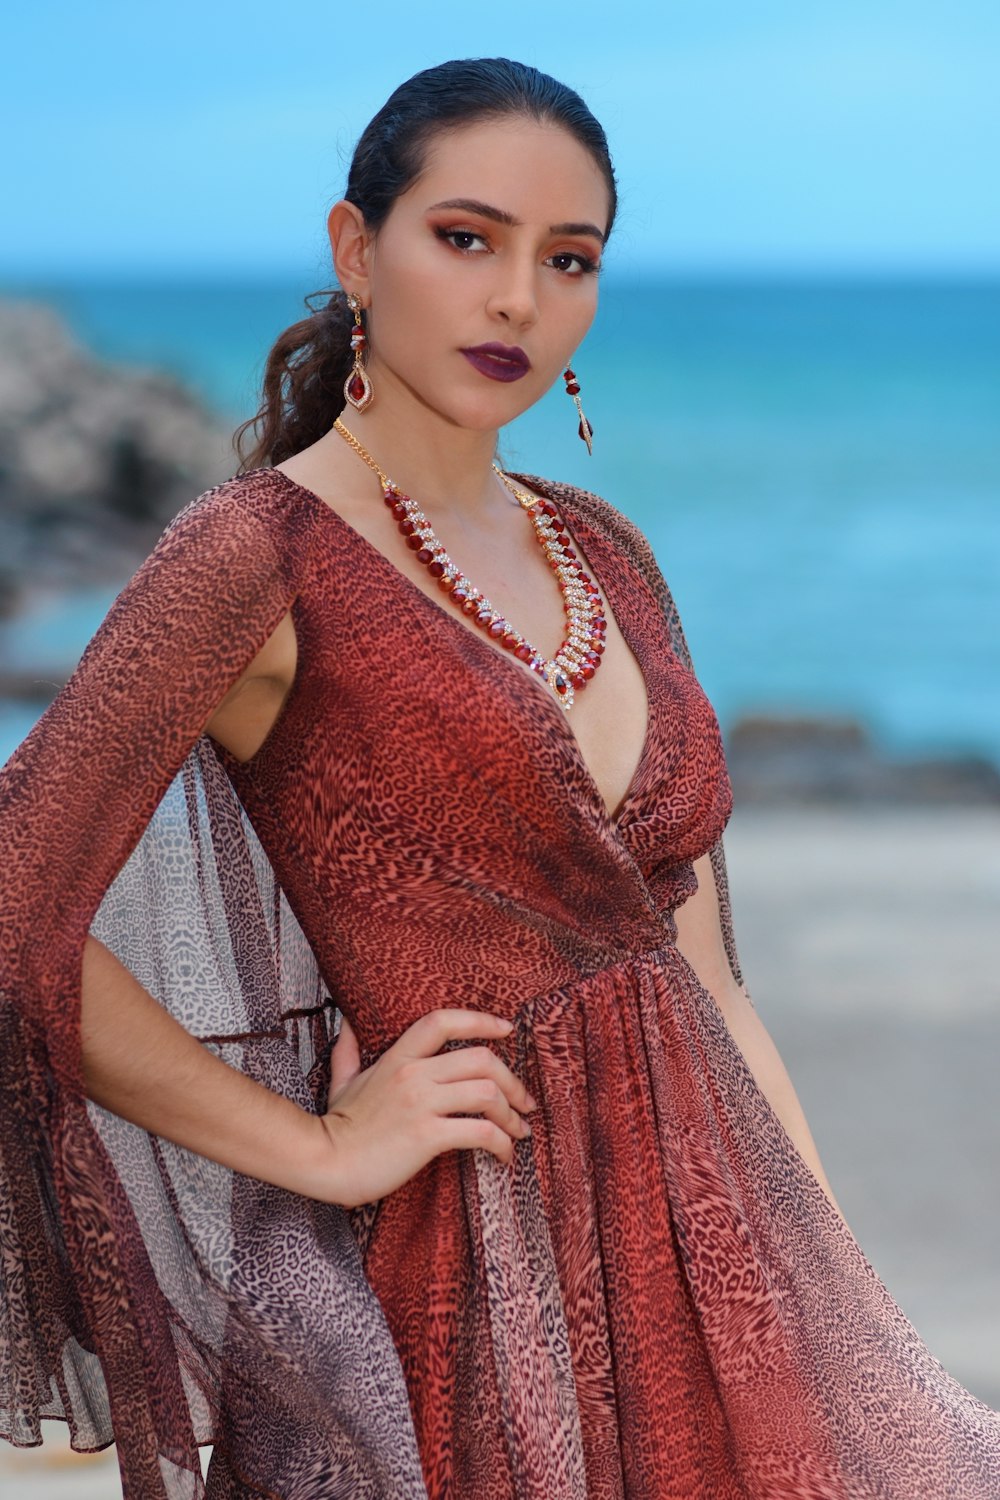 woman in red and brown dress standing on beach during daytime